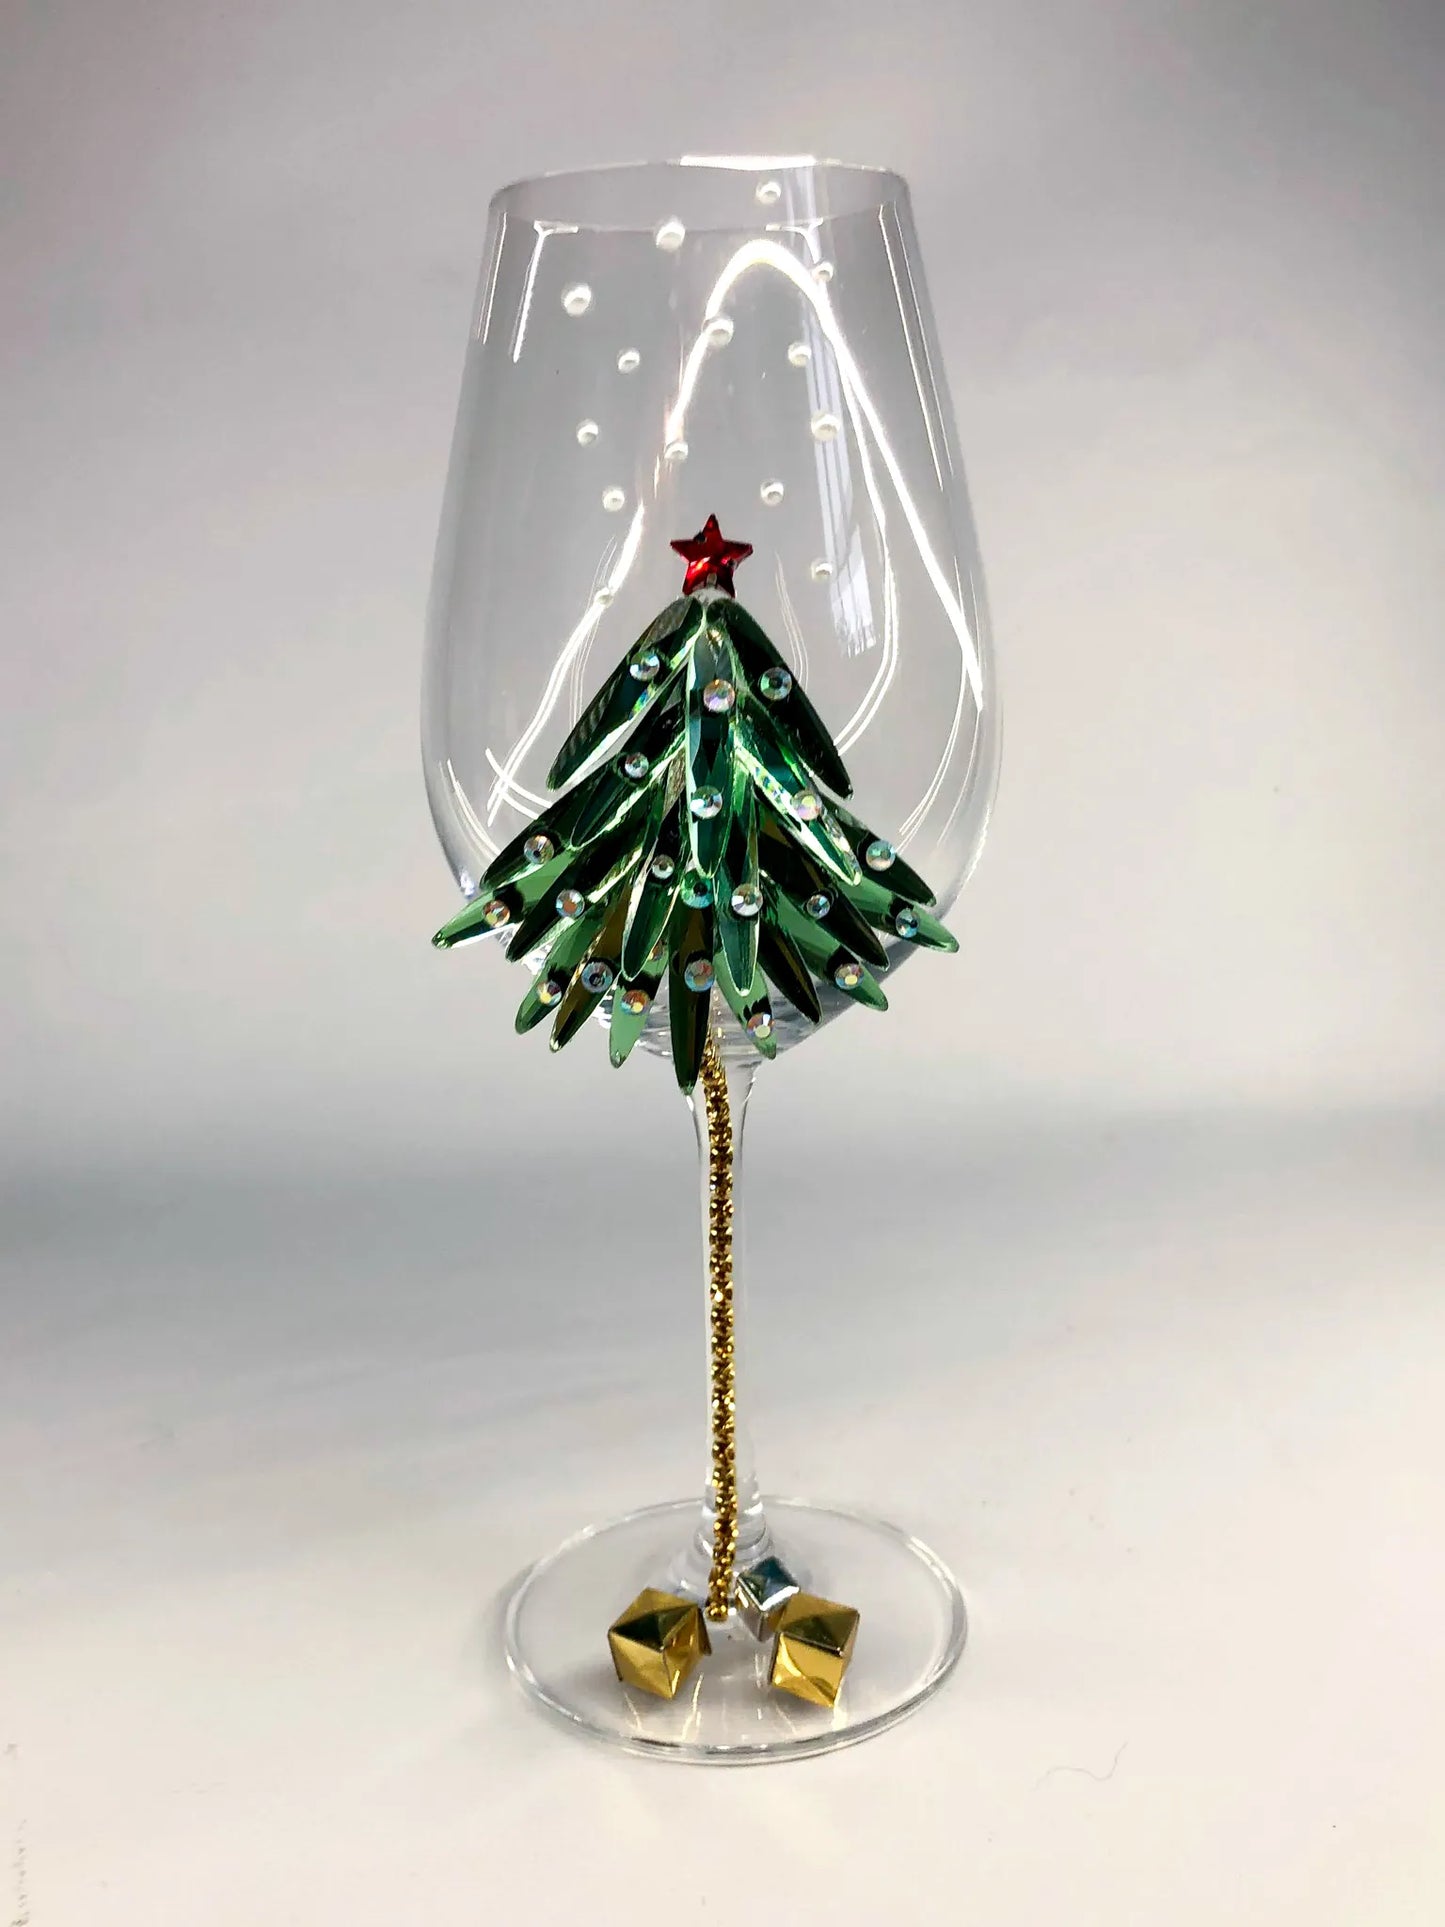 Personalized Wine Glasses with Christmas Tree Design